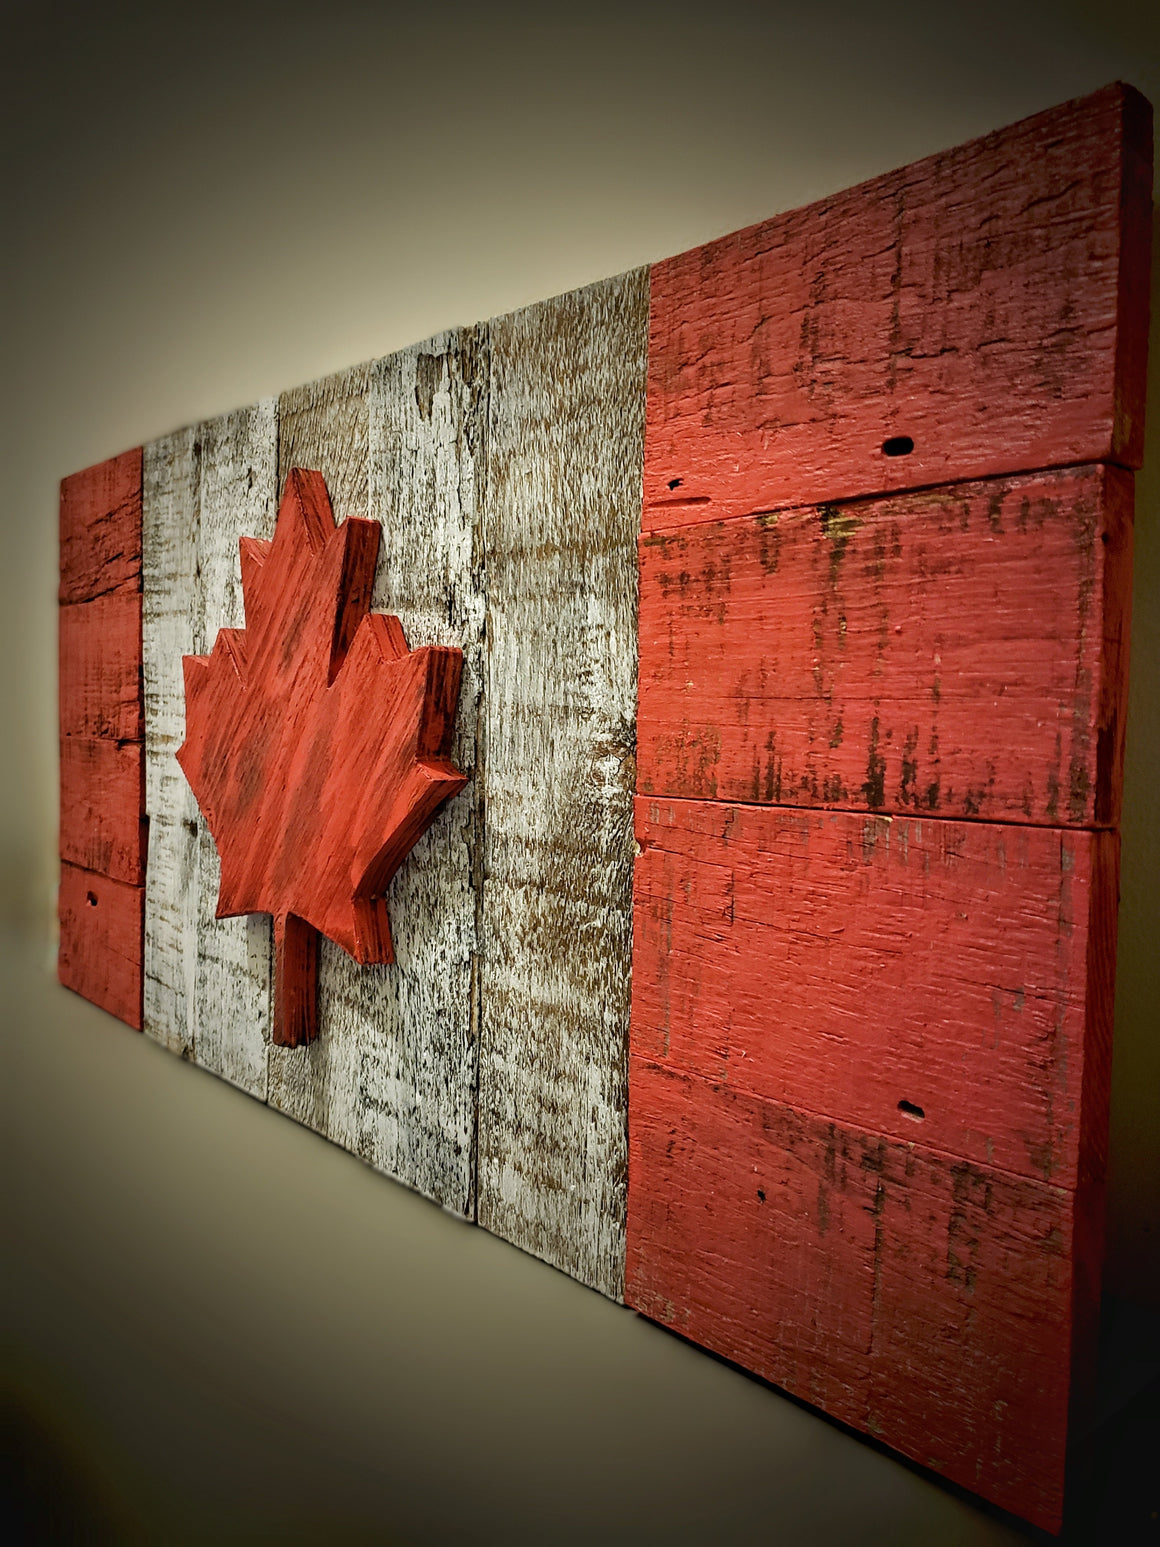 The Rustic Maple LEAF